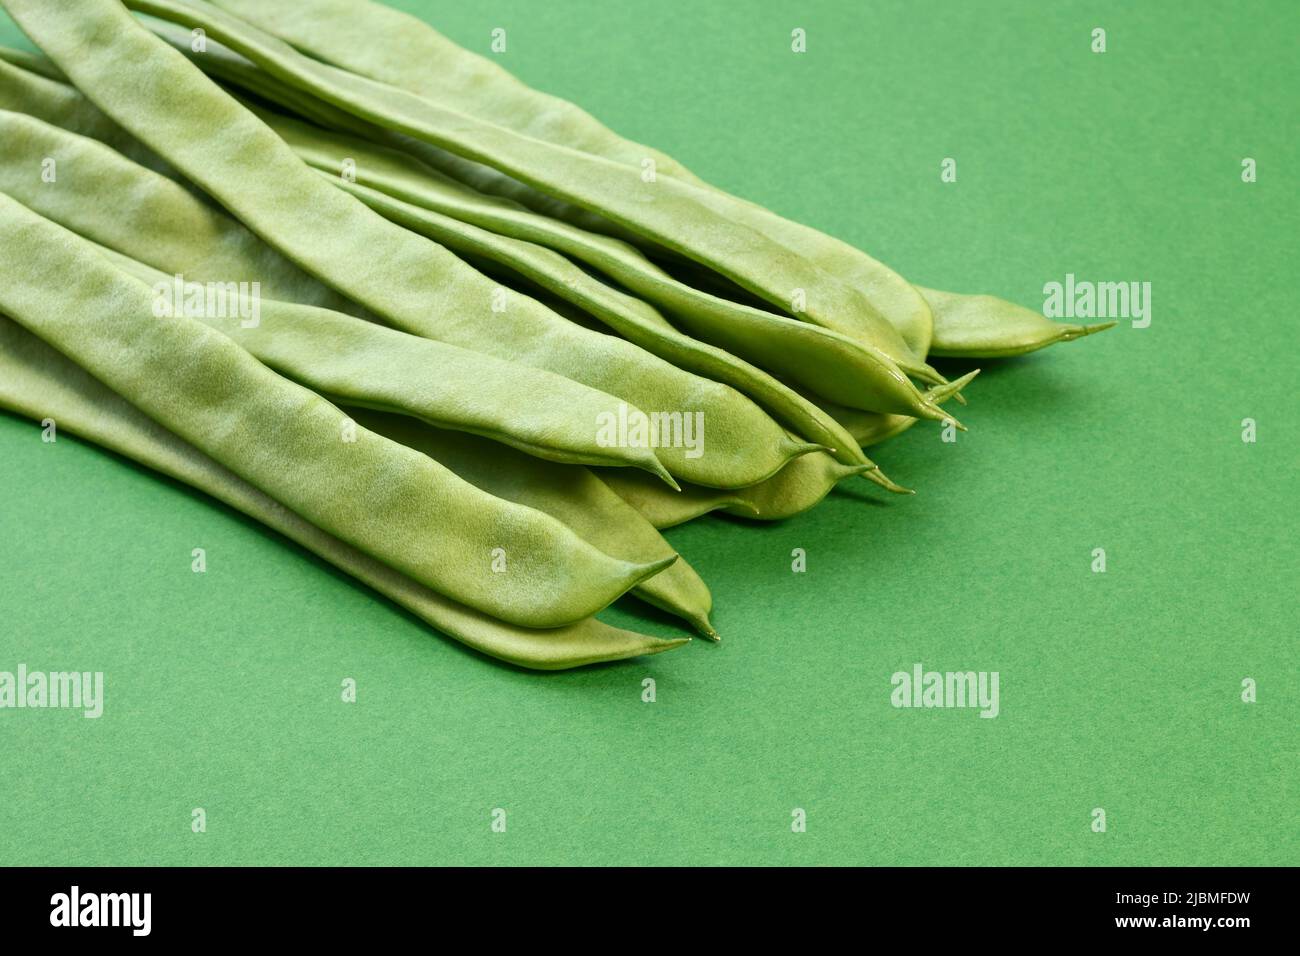 A pile of runner beans on a green background Stock Photo